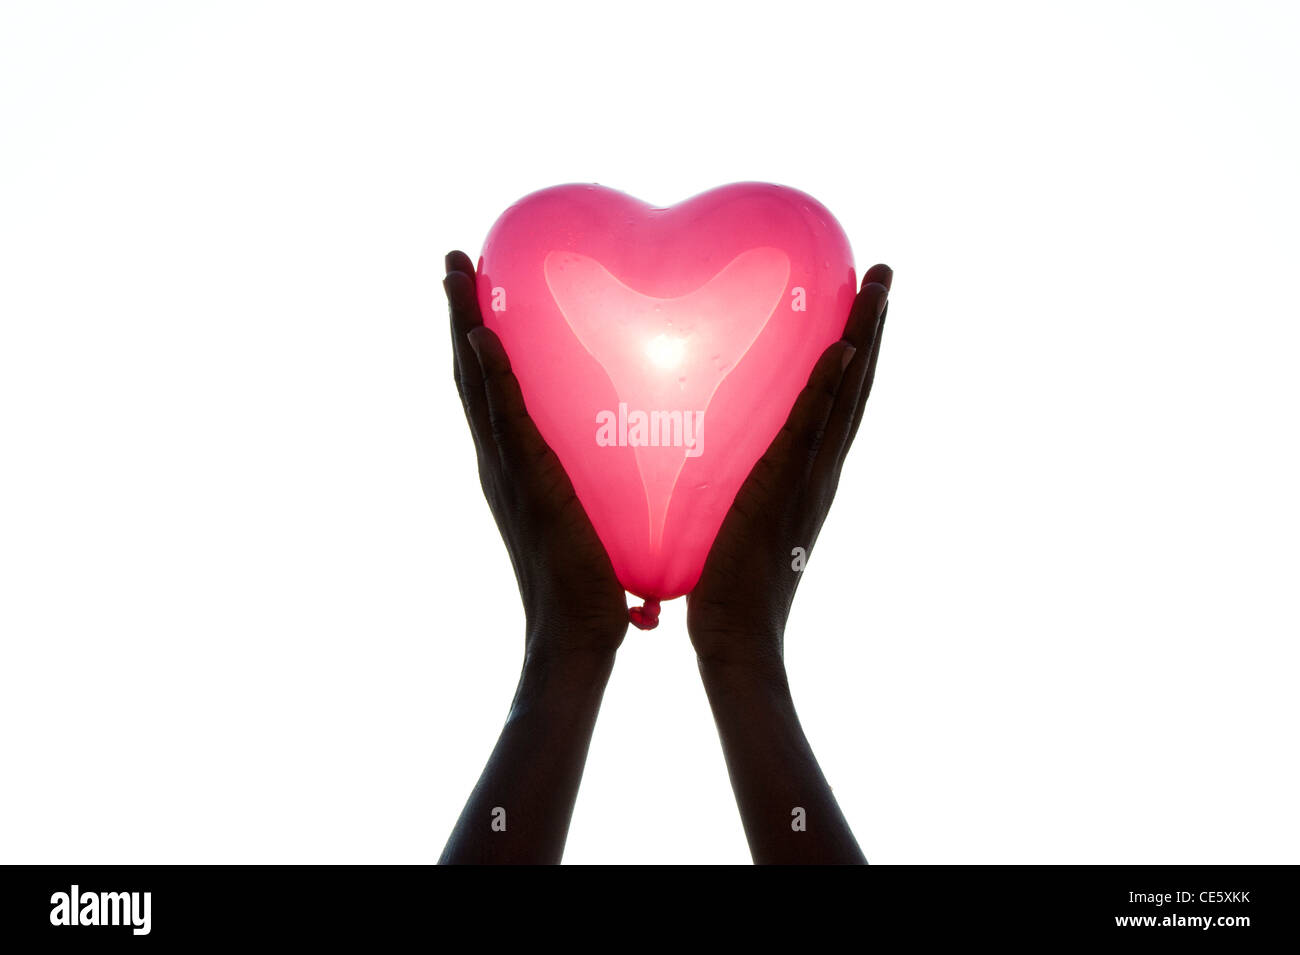 Indian girls hands holding a pink heart shaped balloon Stock Photo